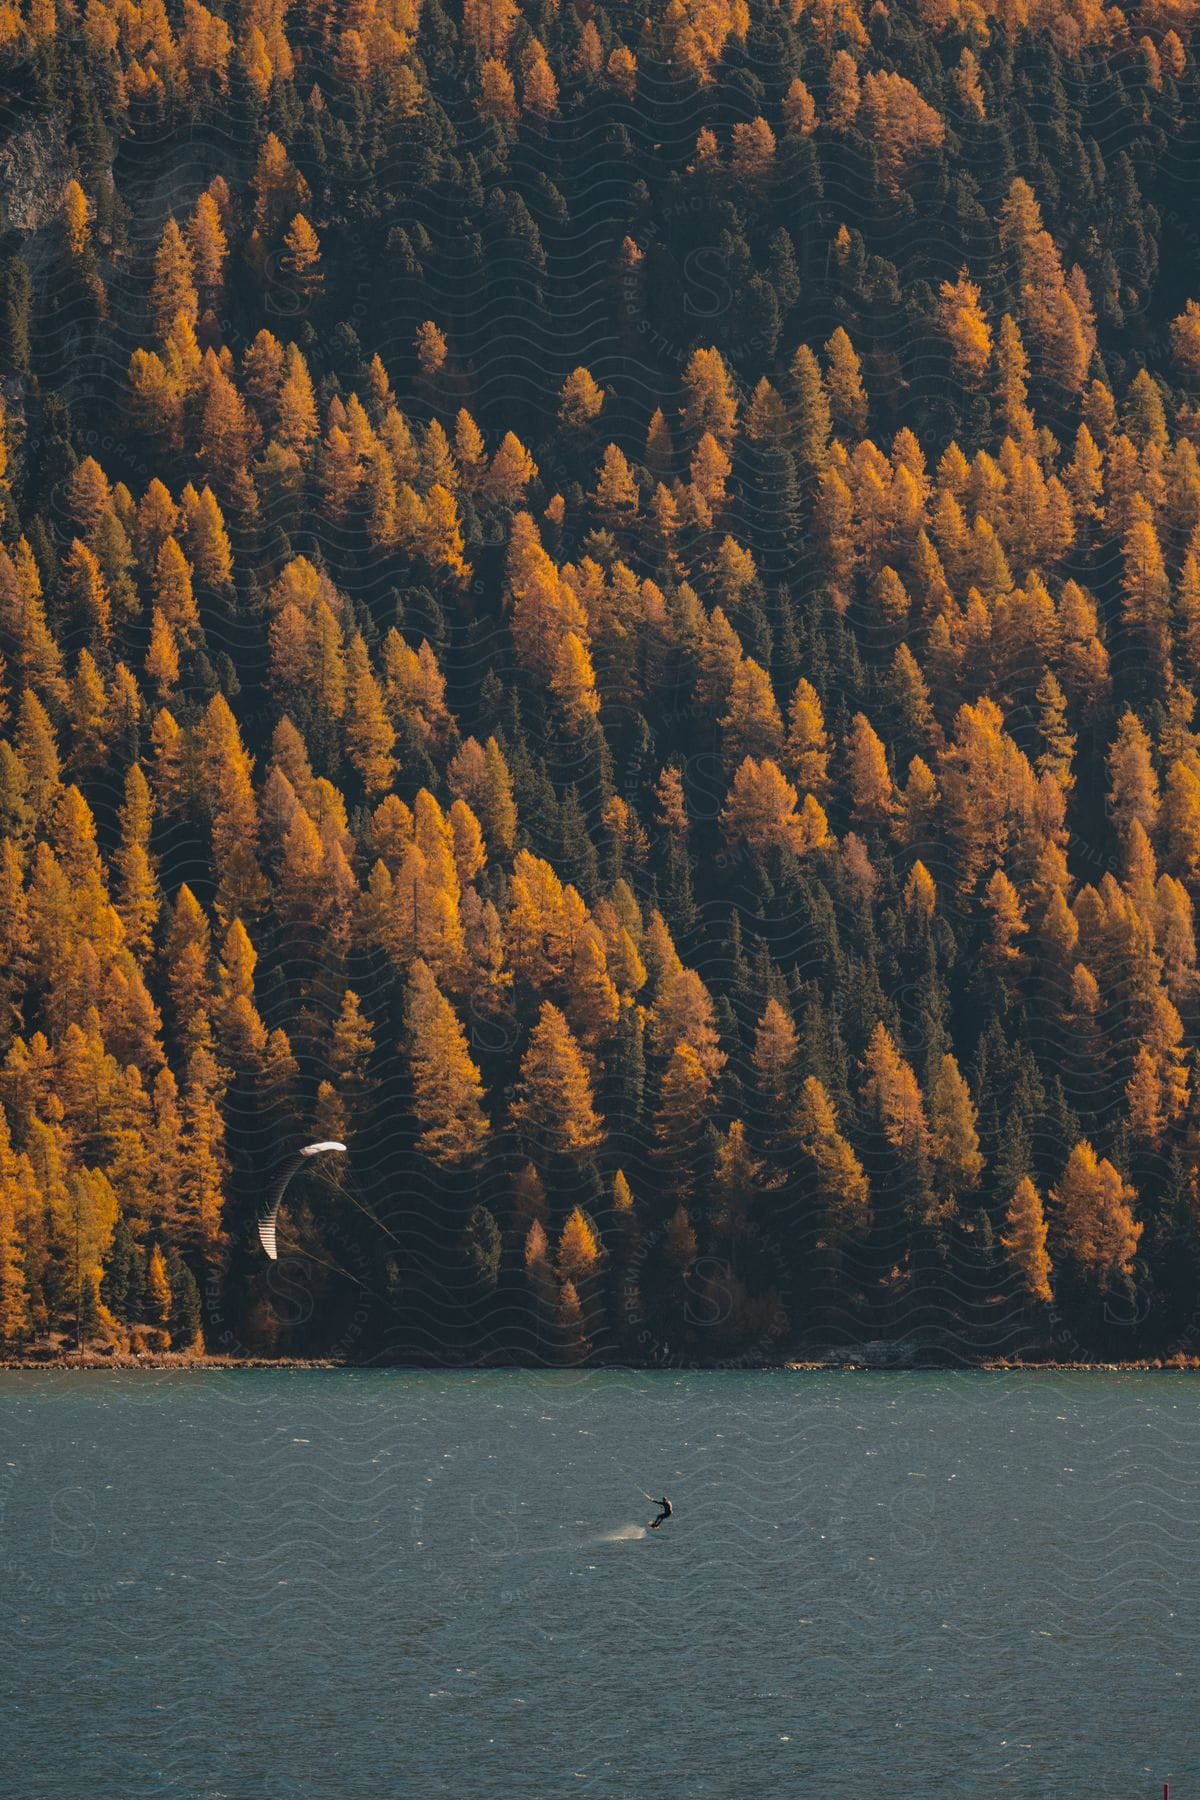 Man parasailing on a lake next to a pine tree forest in the mountains